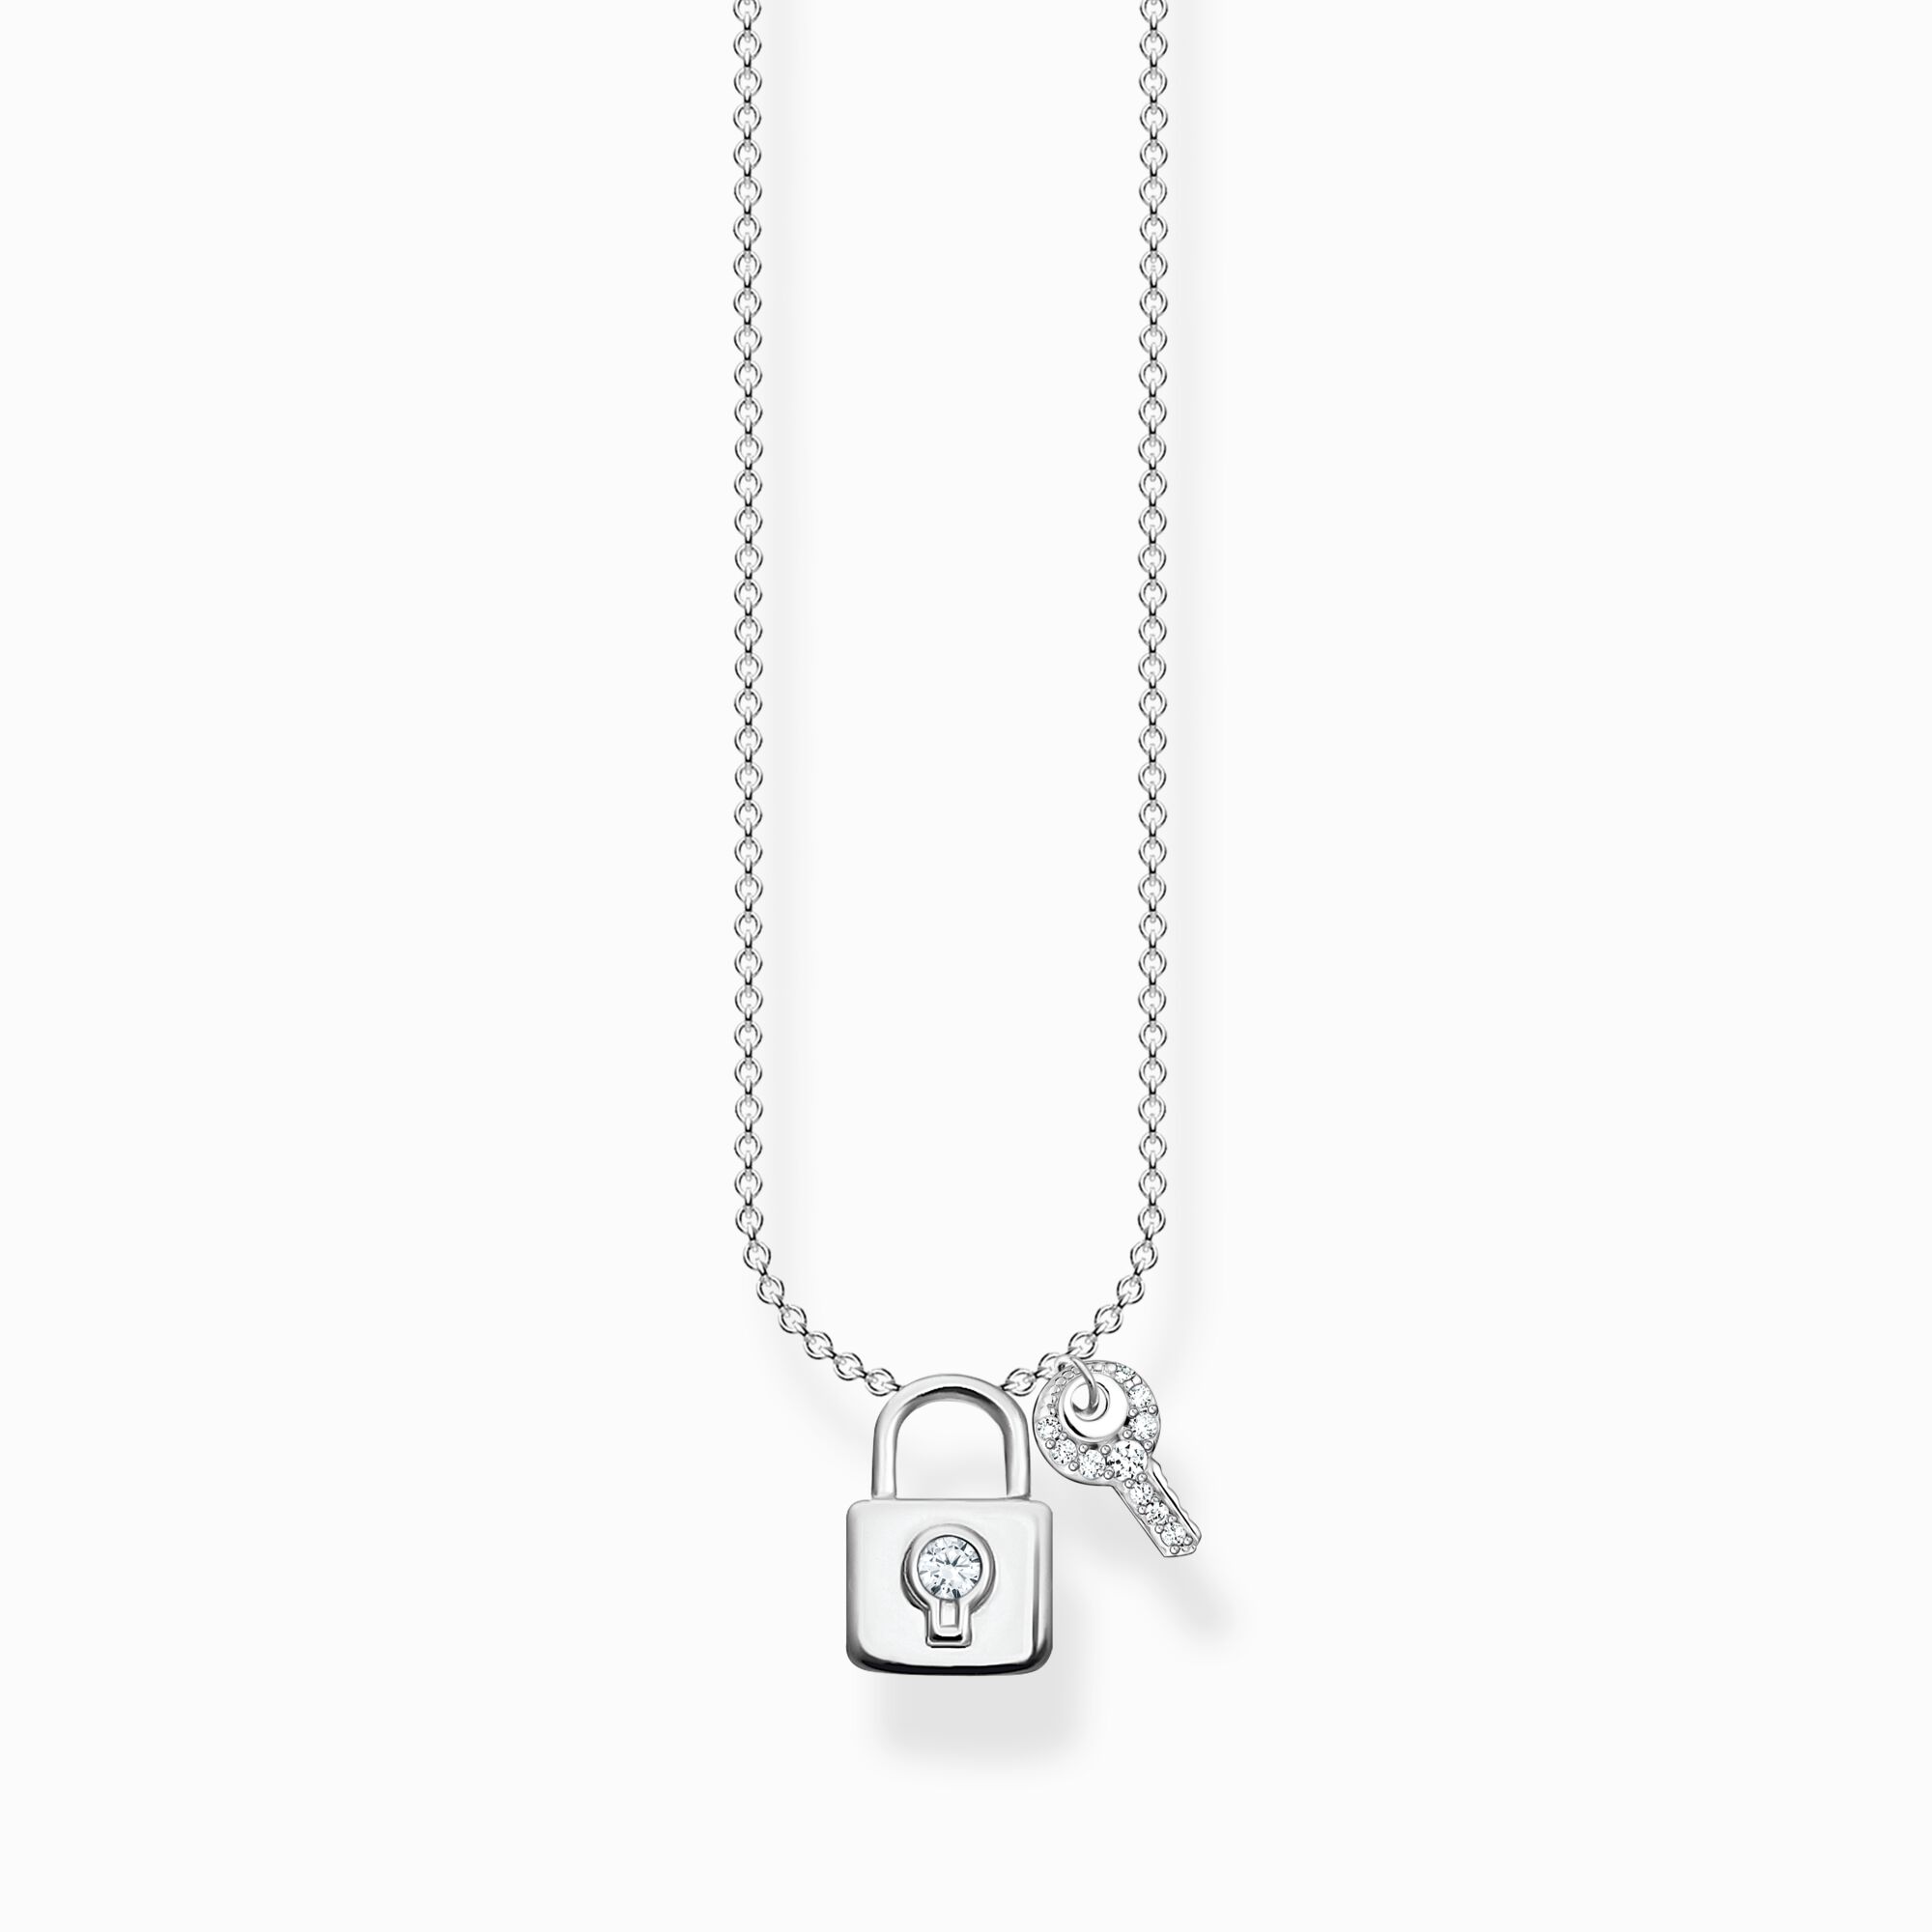 Necklace lock with key silver from the Charming Collection collection in the THOMAS SABO online store